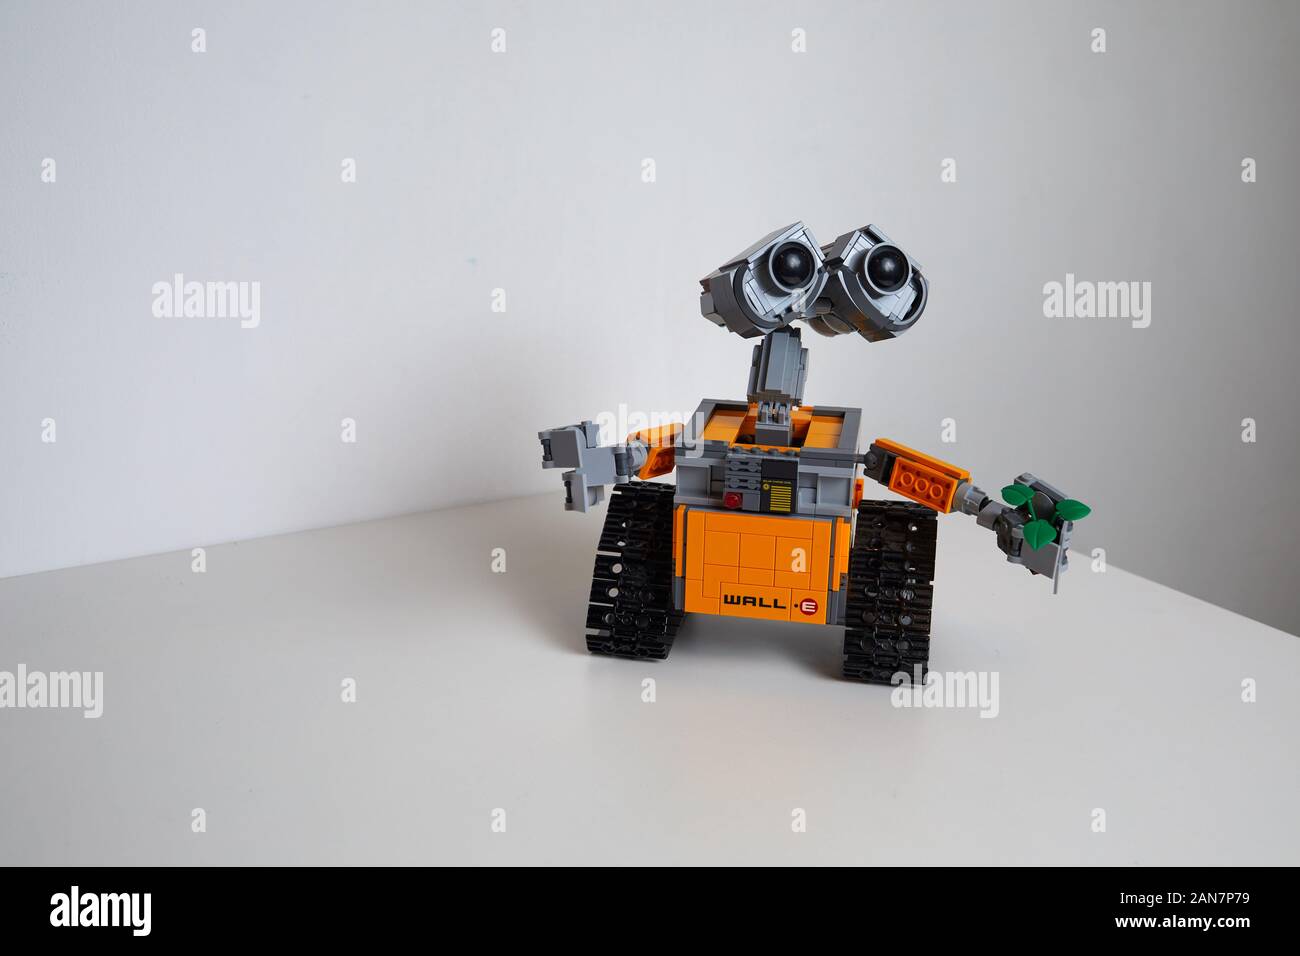 Wall-e Lego character from the Disney Pixar film Stock Photo - Alamy